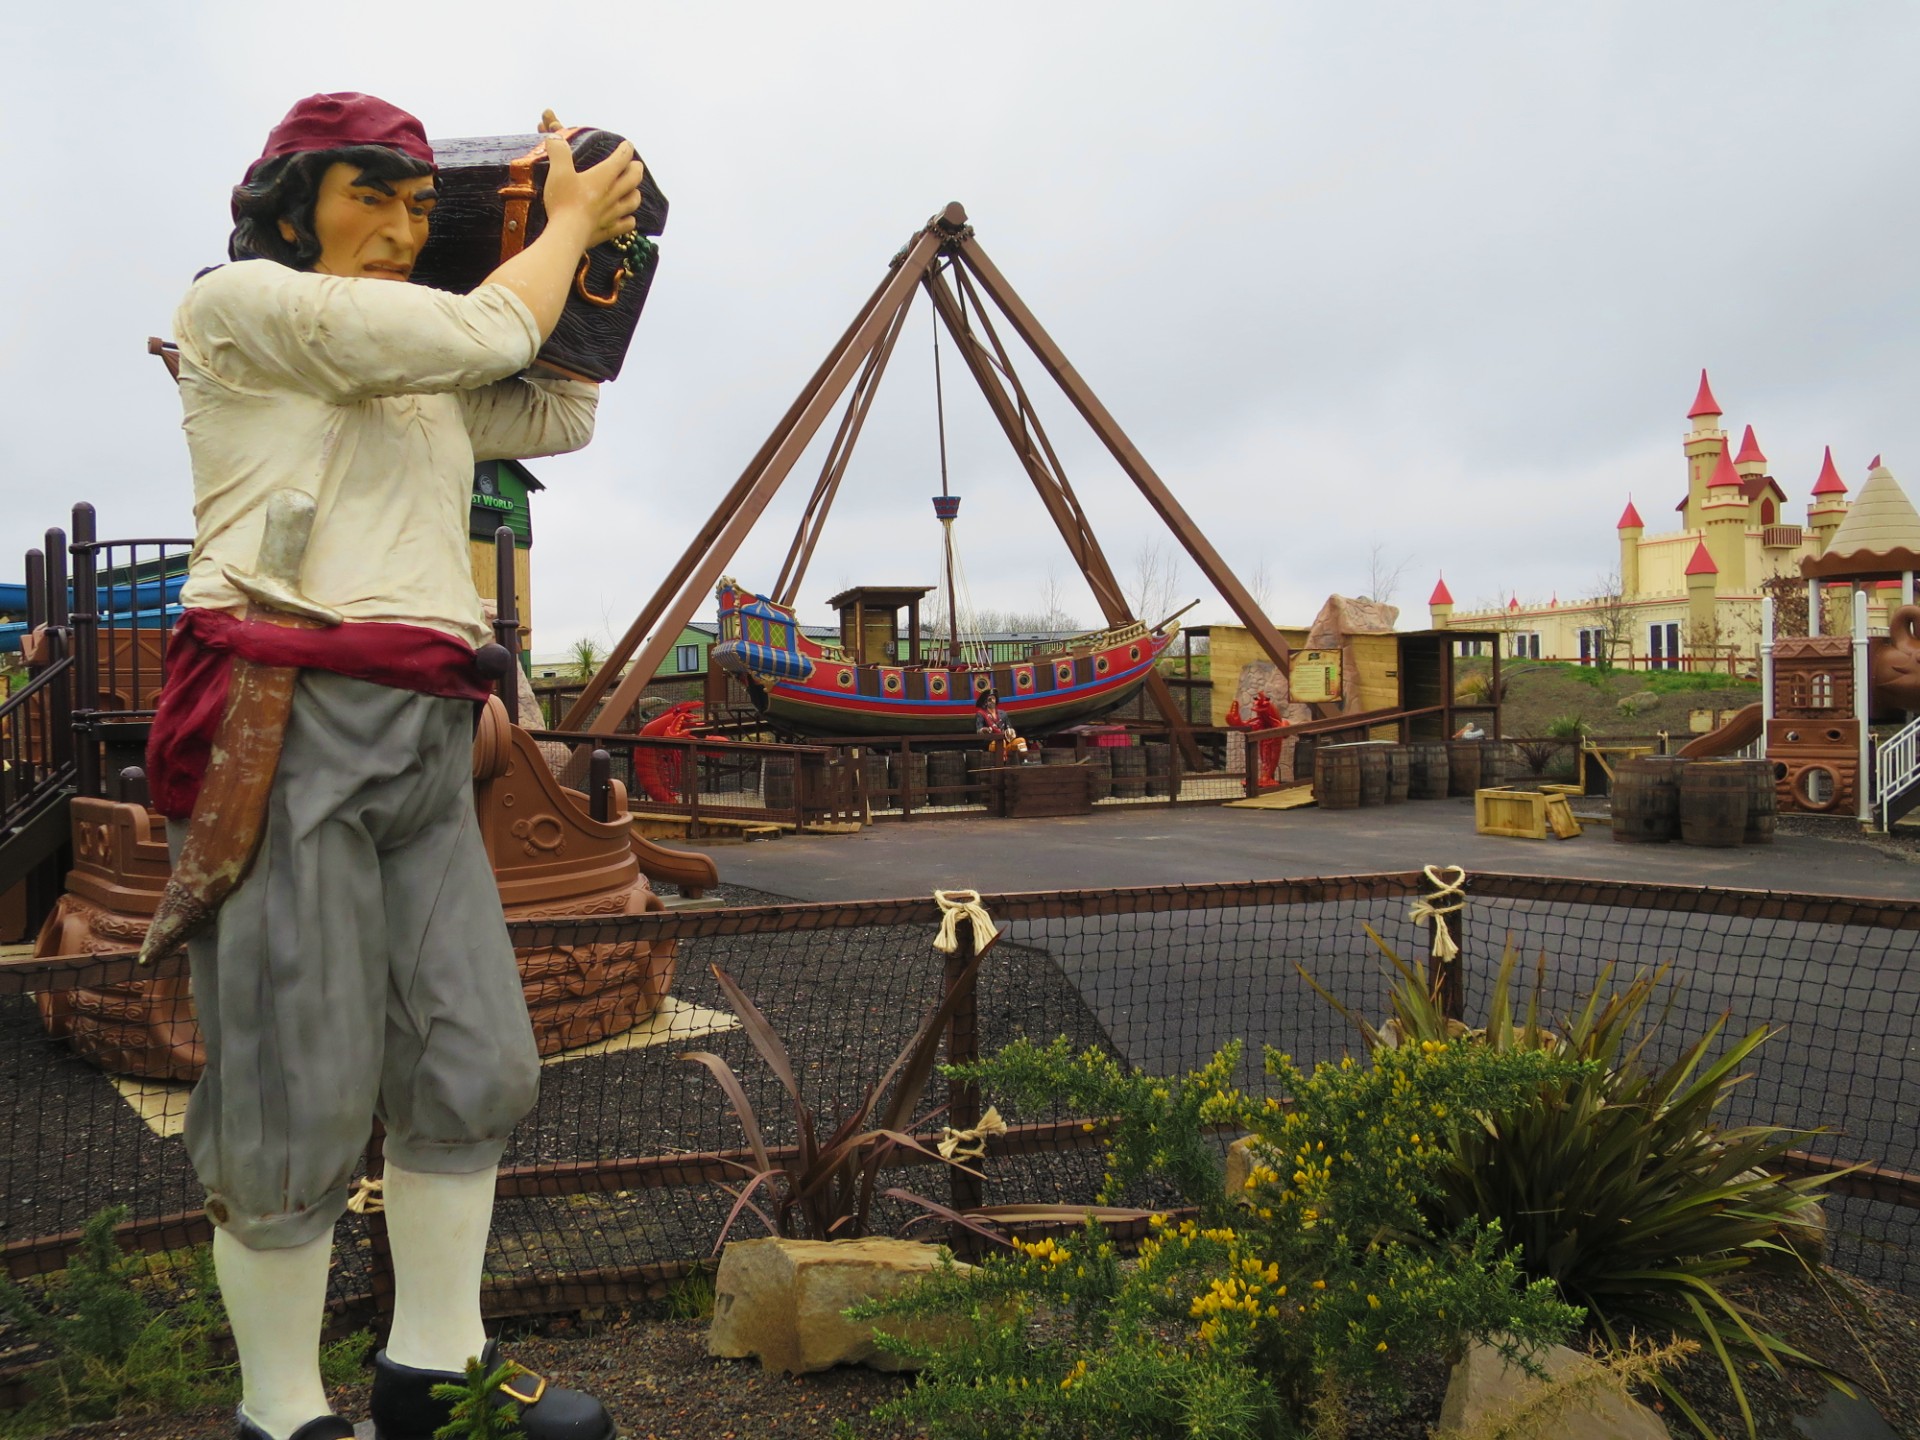 New Gulliver’s Valley Theme Park announces opening date